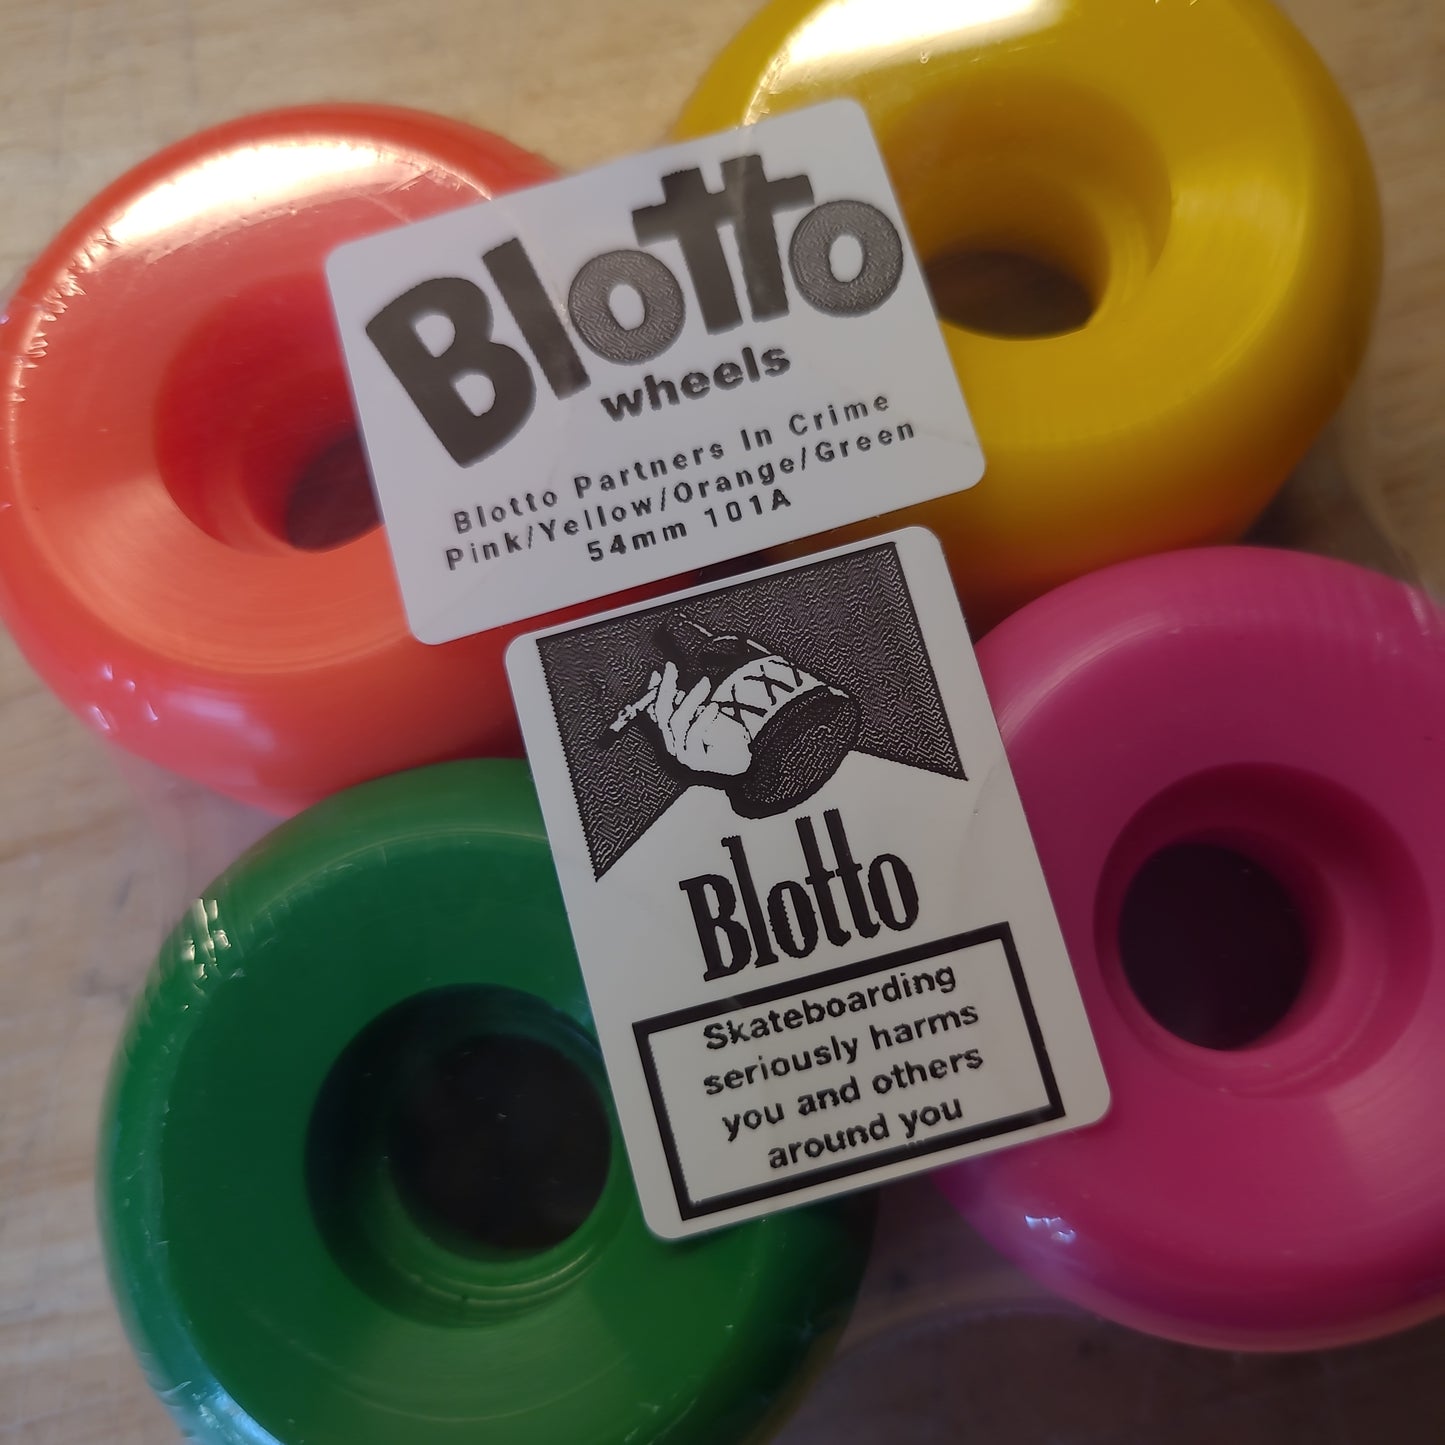 Blotto - Partners in Crime 54mm 101A Wheels